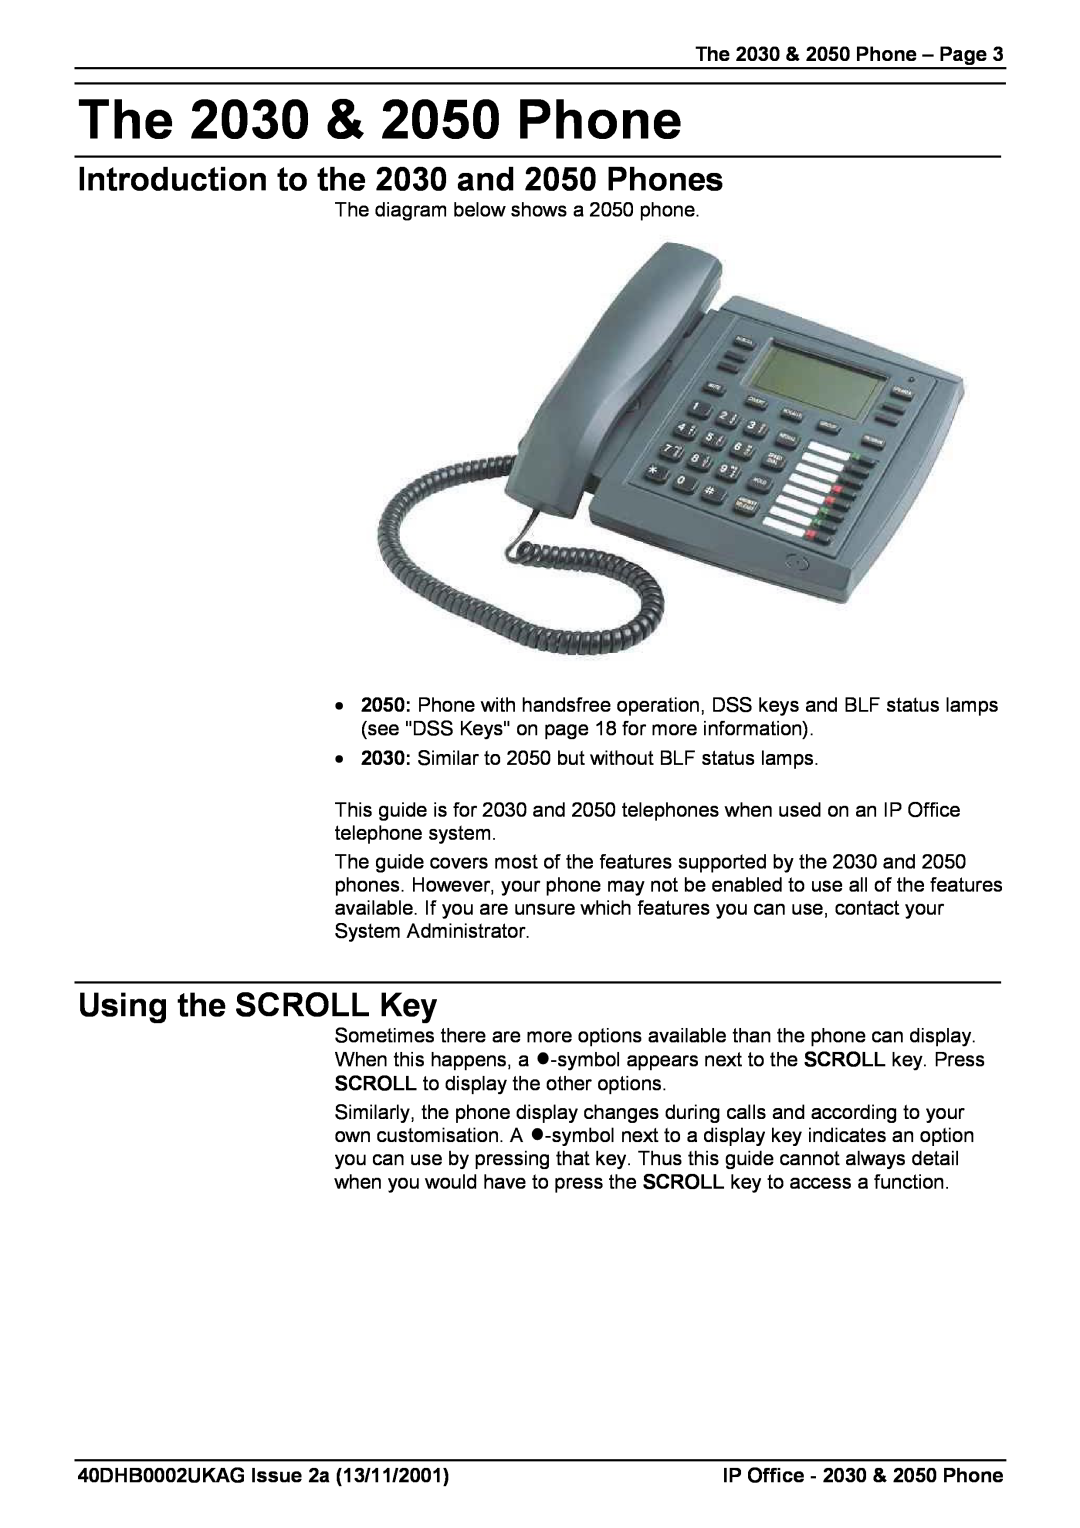 Avaya manual The 2030 & 2050 Phone, Introduction to the 2030 and 2050 Phones, Using the SCROLL Key 